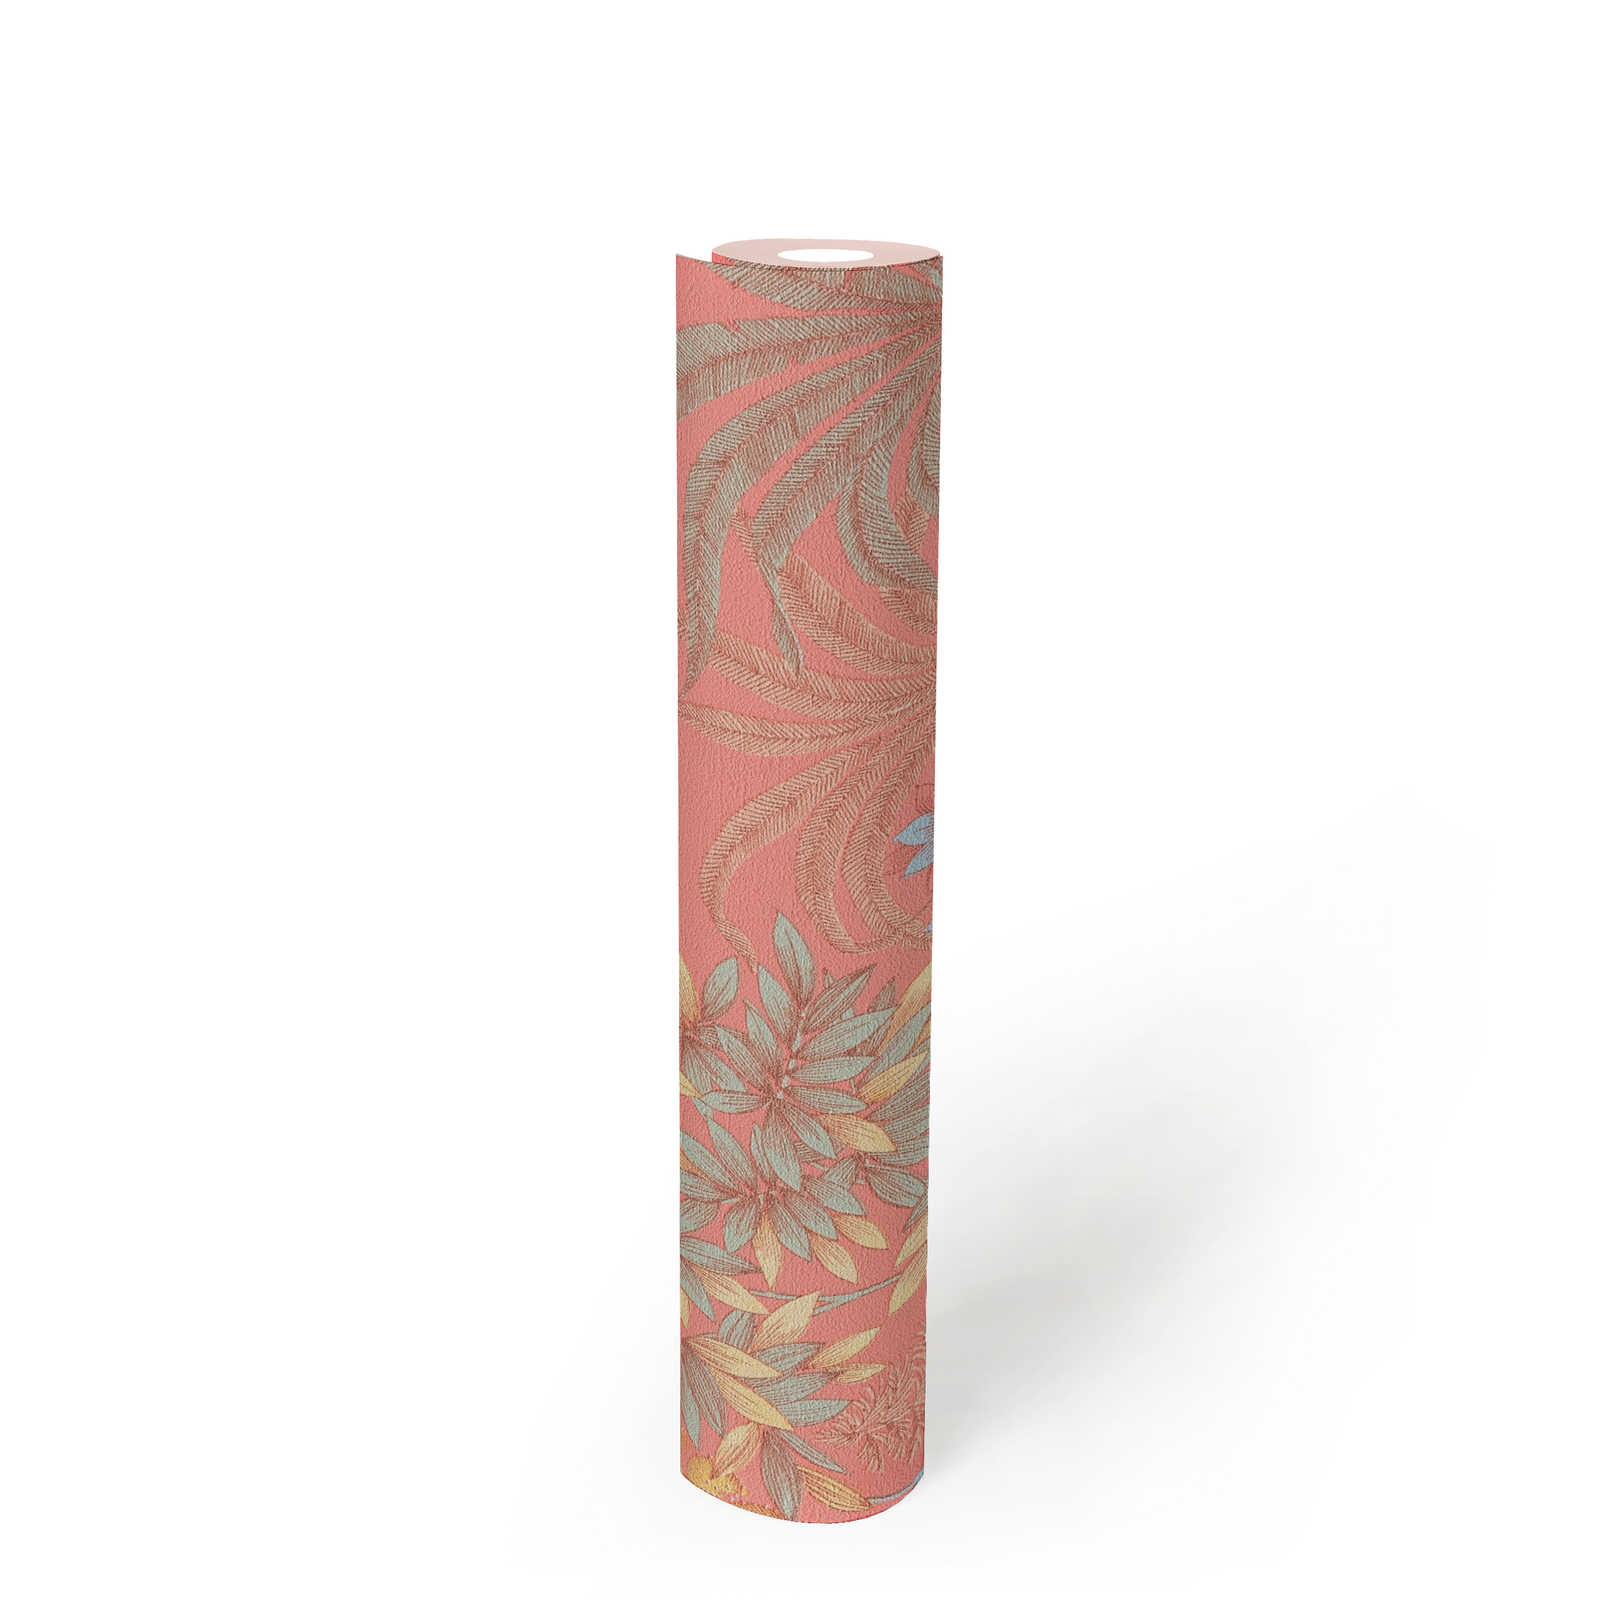             Playful floral wallpaper in a subtle colour - pink, blue, yellow
        